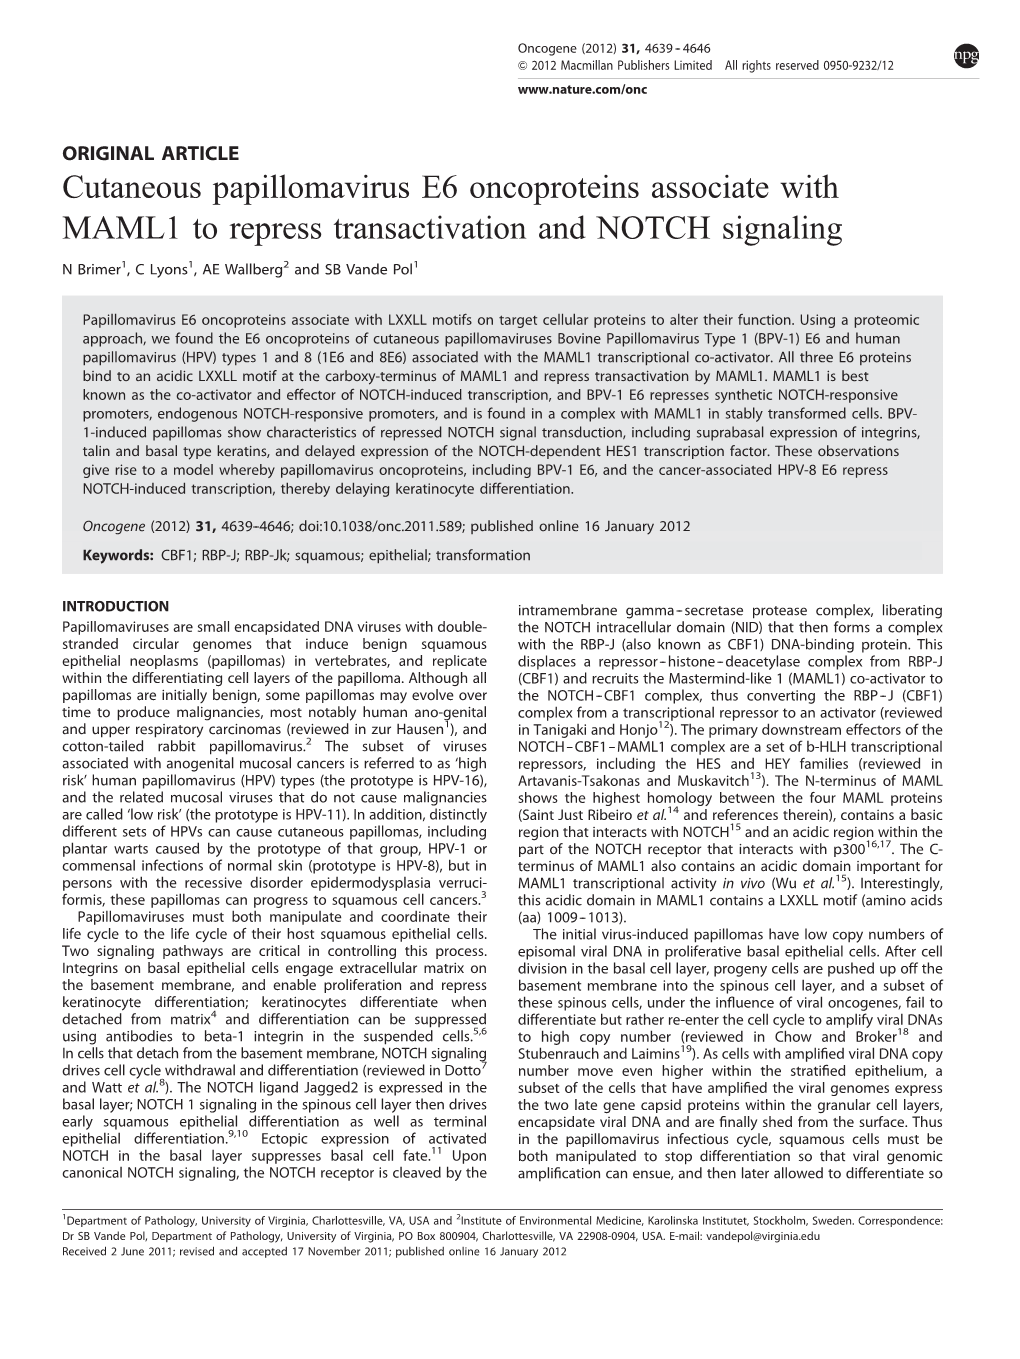 Cutaneous Papillomavirus E6 Oncoproteins Associate with MAML1 to Repress Transactivation and NOTCH Signaling